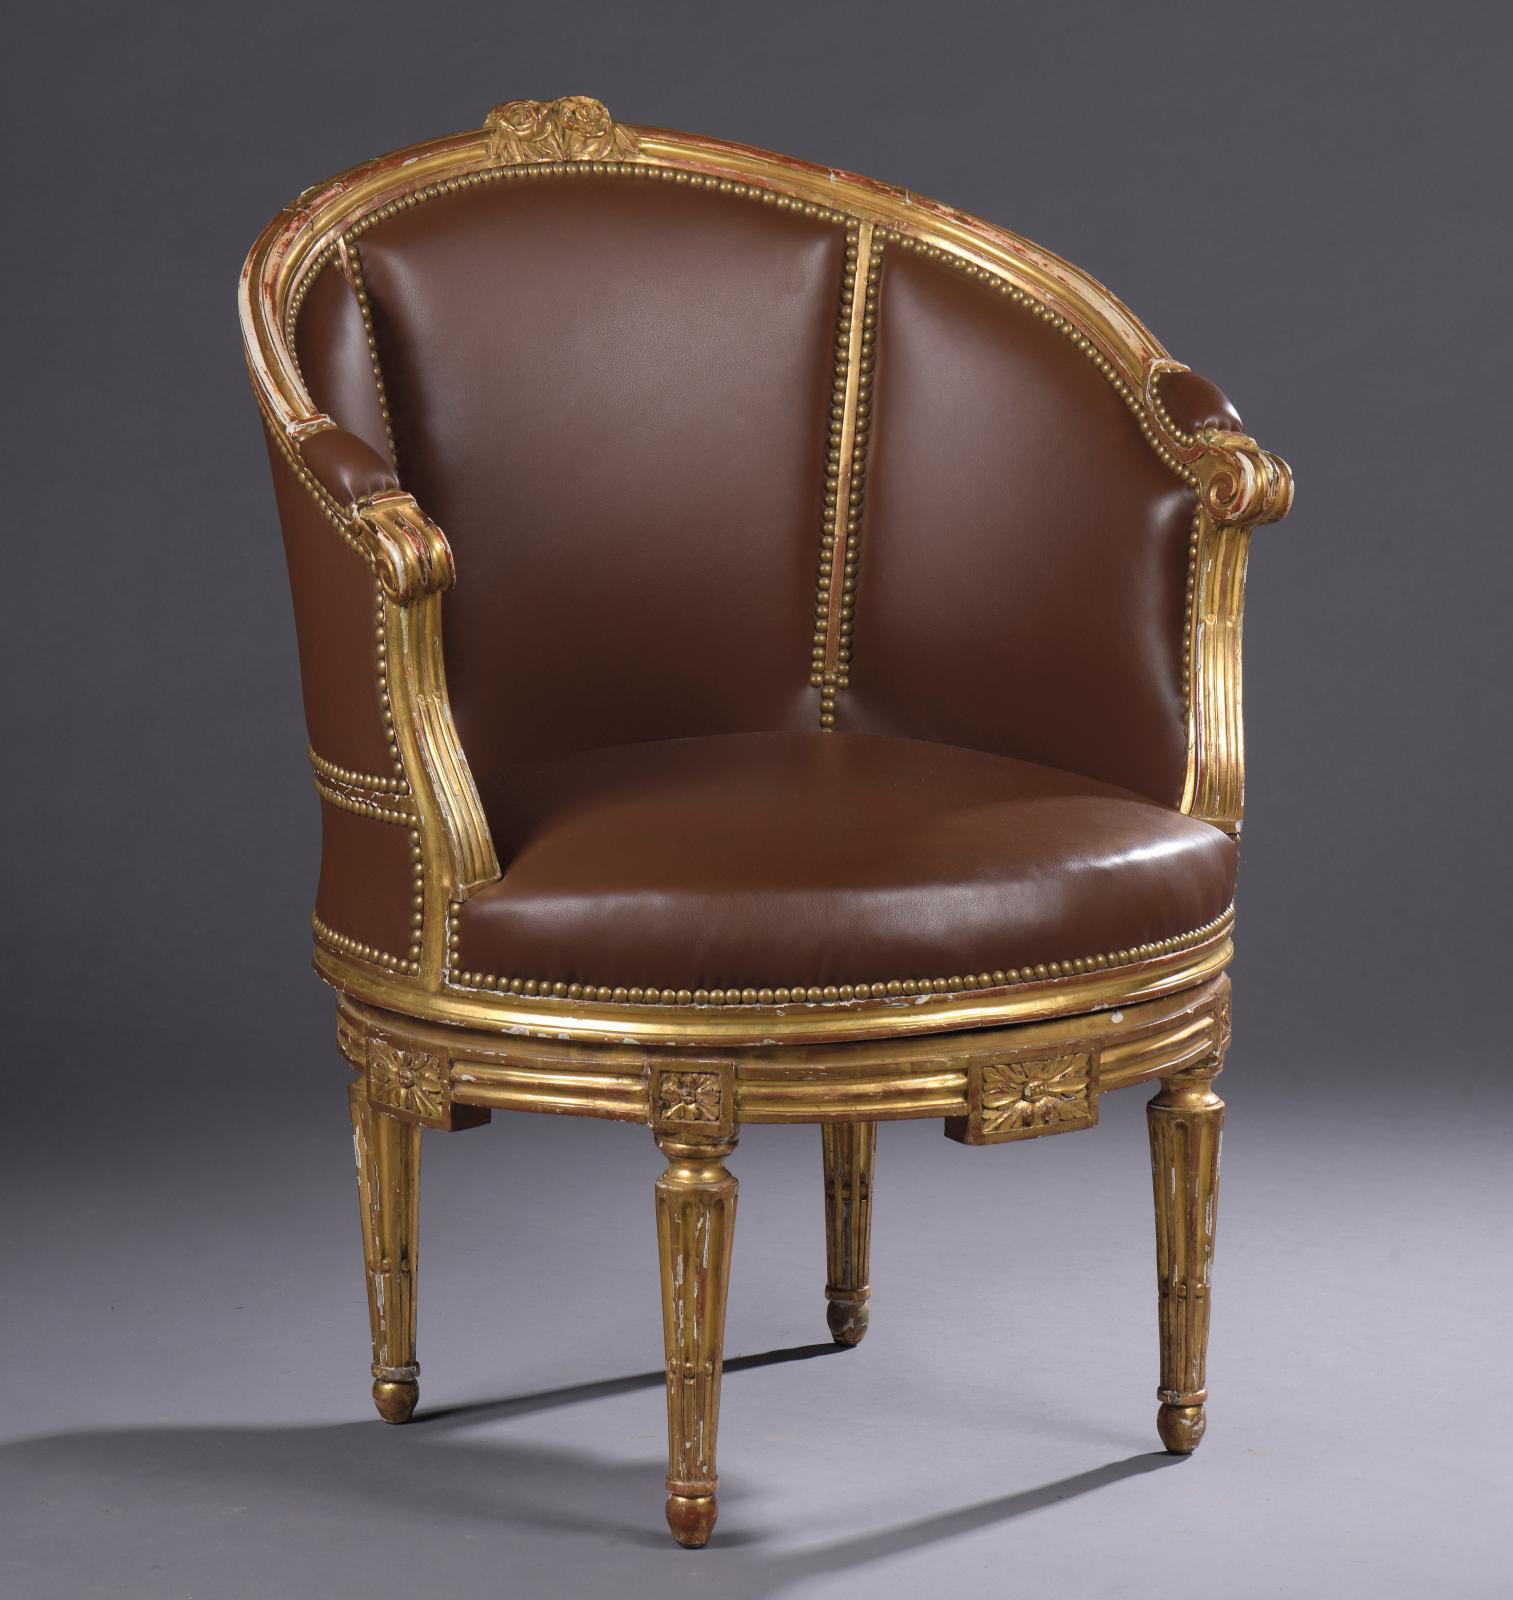 Louis XVI period, armchair stamped by the cabinetmaker Sulpice Brizard (1733-after 1796), molded, carved and gilded wood, with a wrap-arou